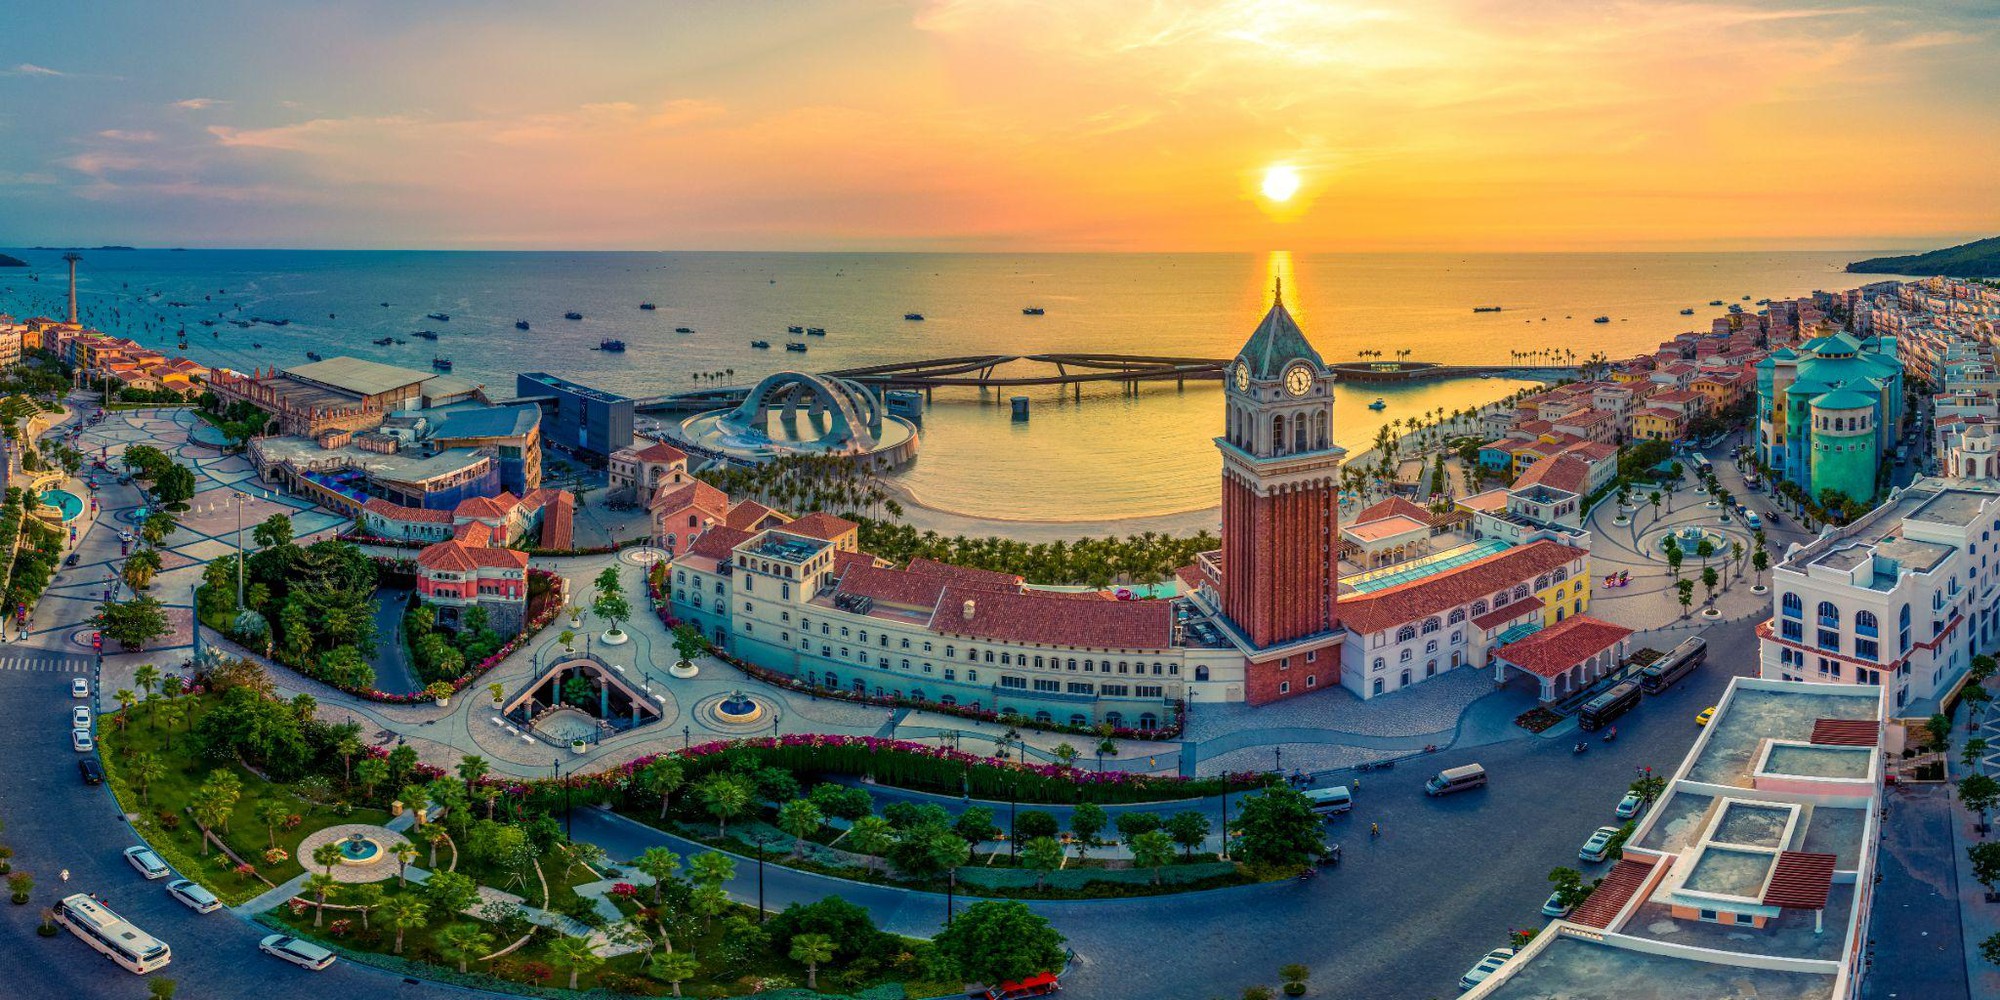 Is Vietnam home to the world’s most beautiful sunset spot? - Ảnh 2.